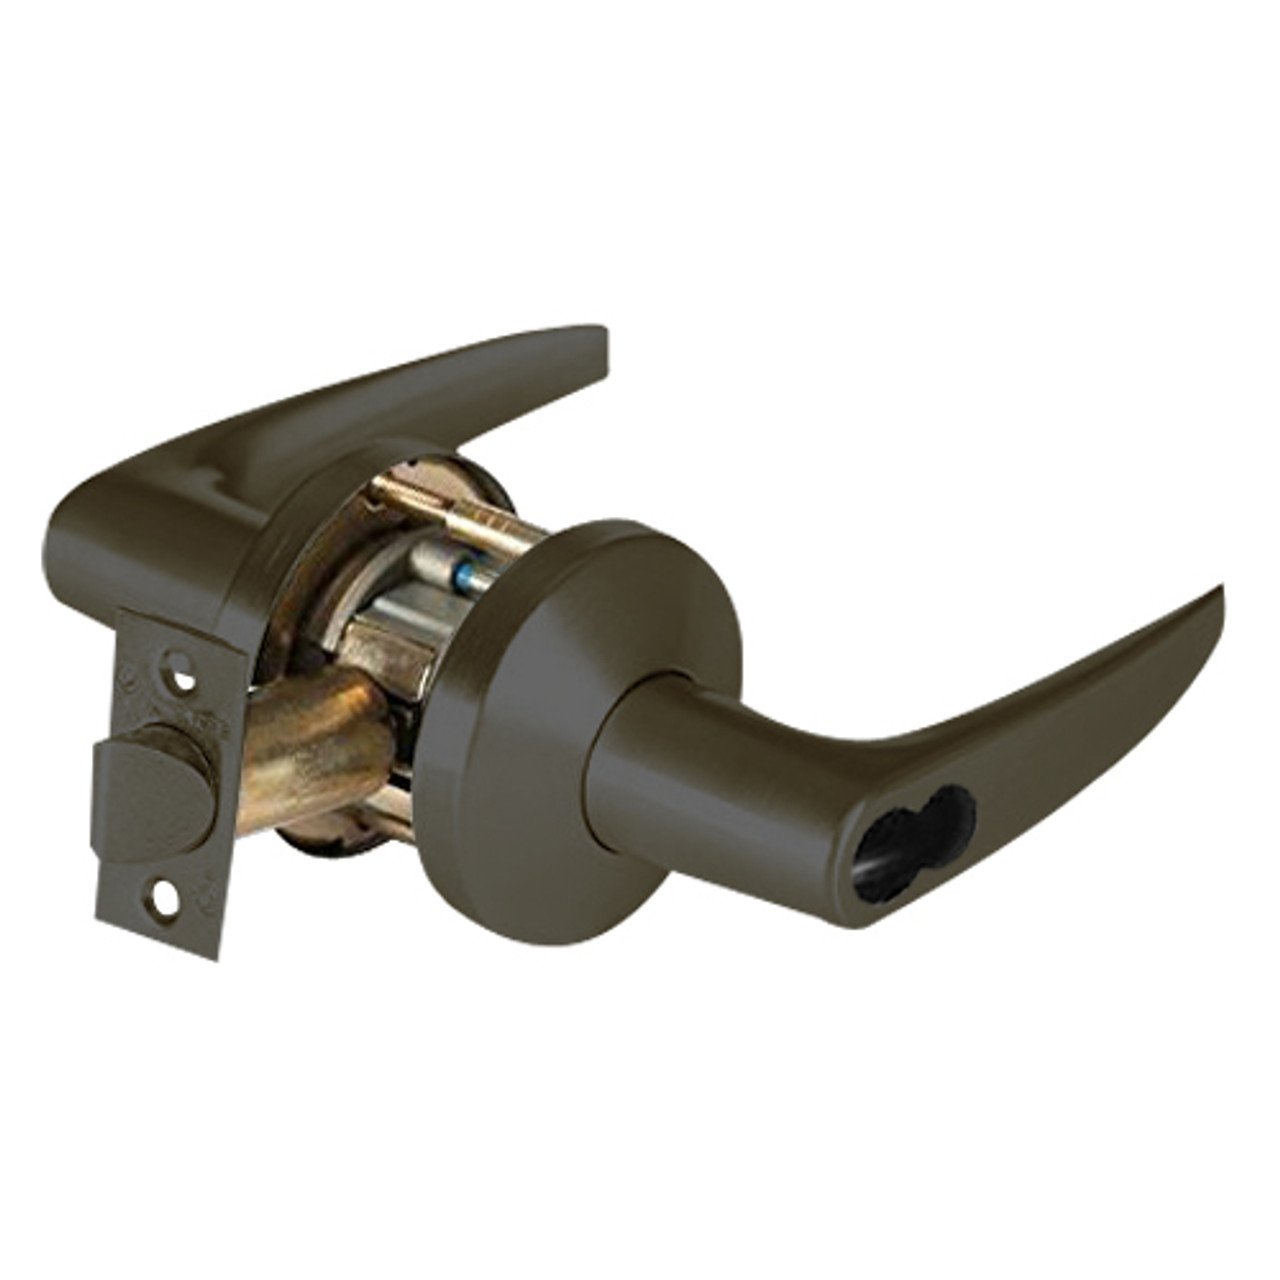 9KW37DEU16KSTK613 Best 9KW Series Fail Secure Electromechanical Heavy Duty Cylindrical Lock with Curved w/ No Return Style in Oil Rubbed Bronze